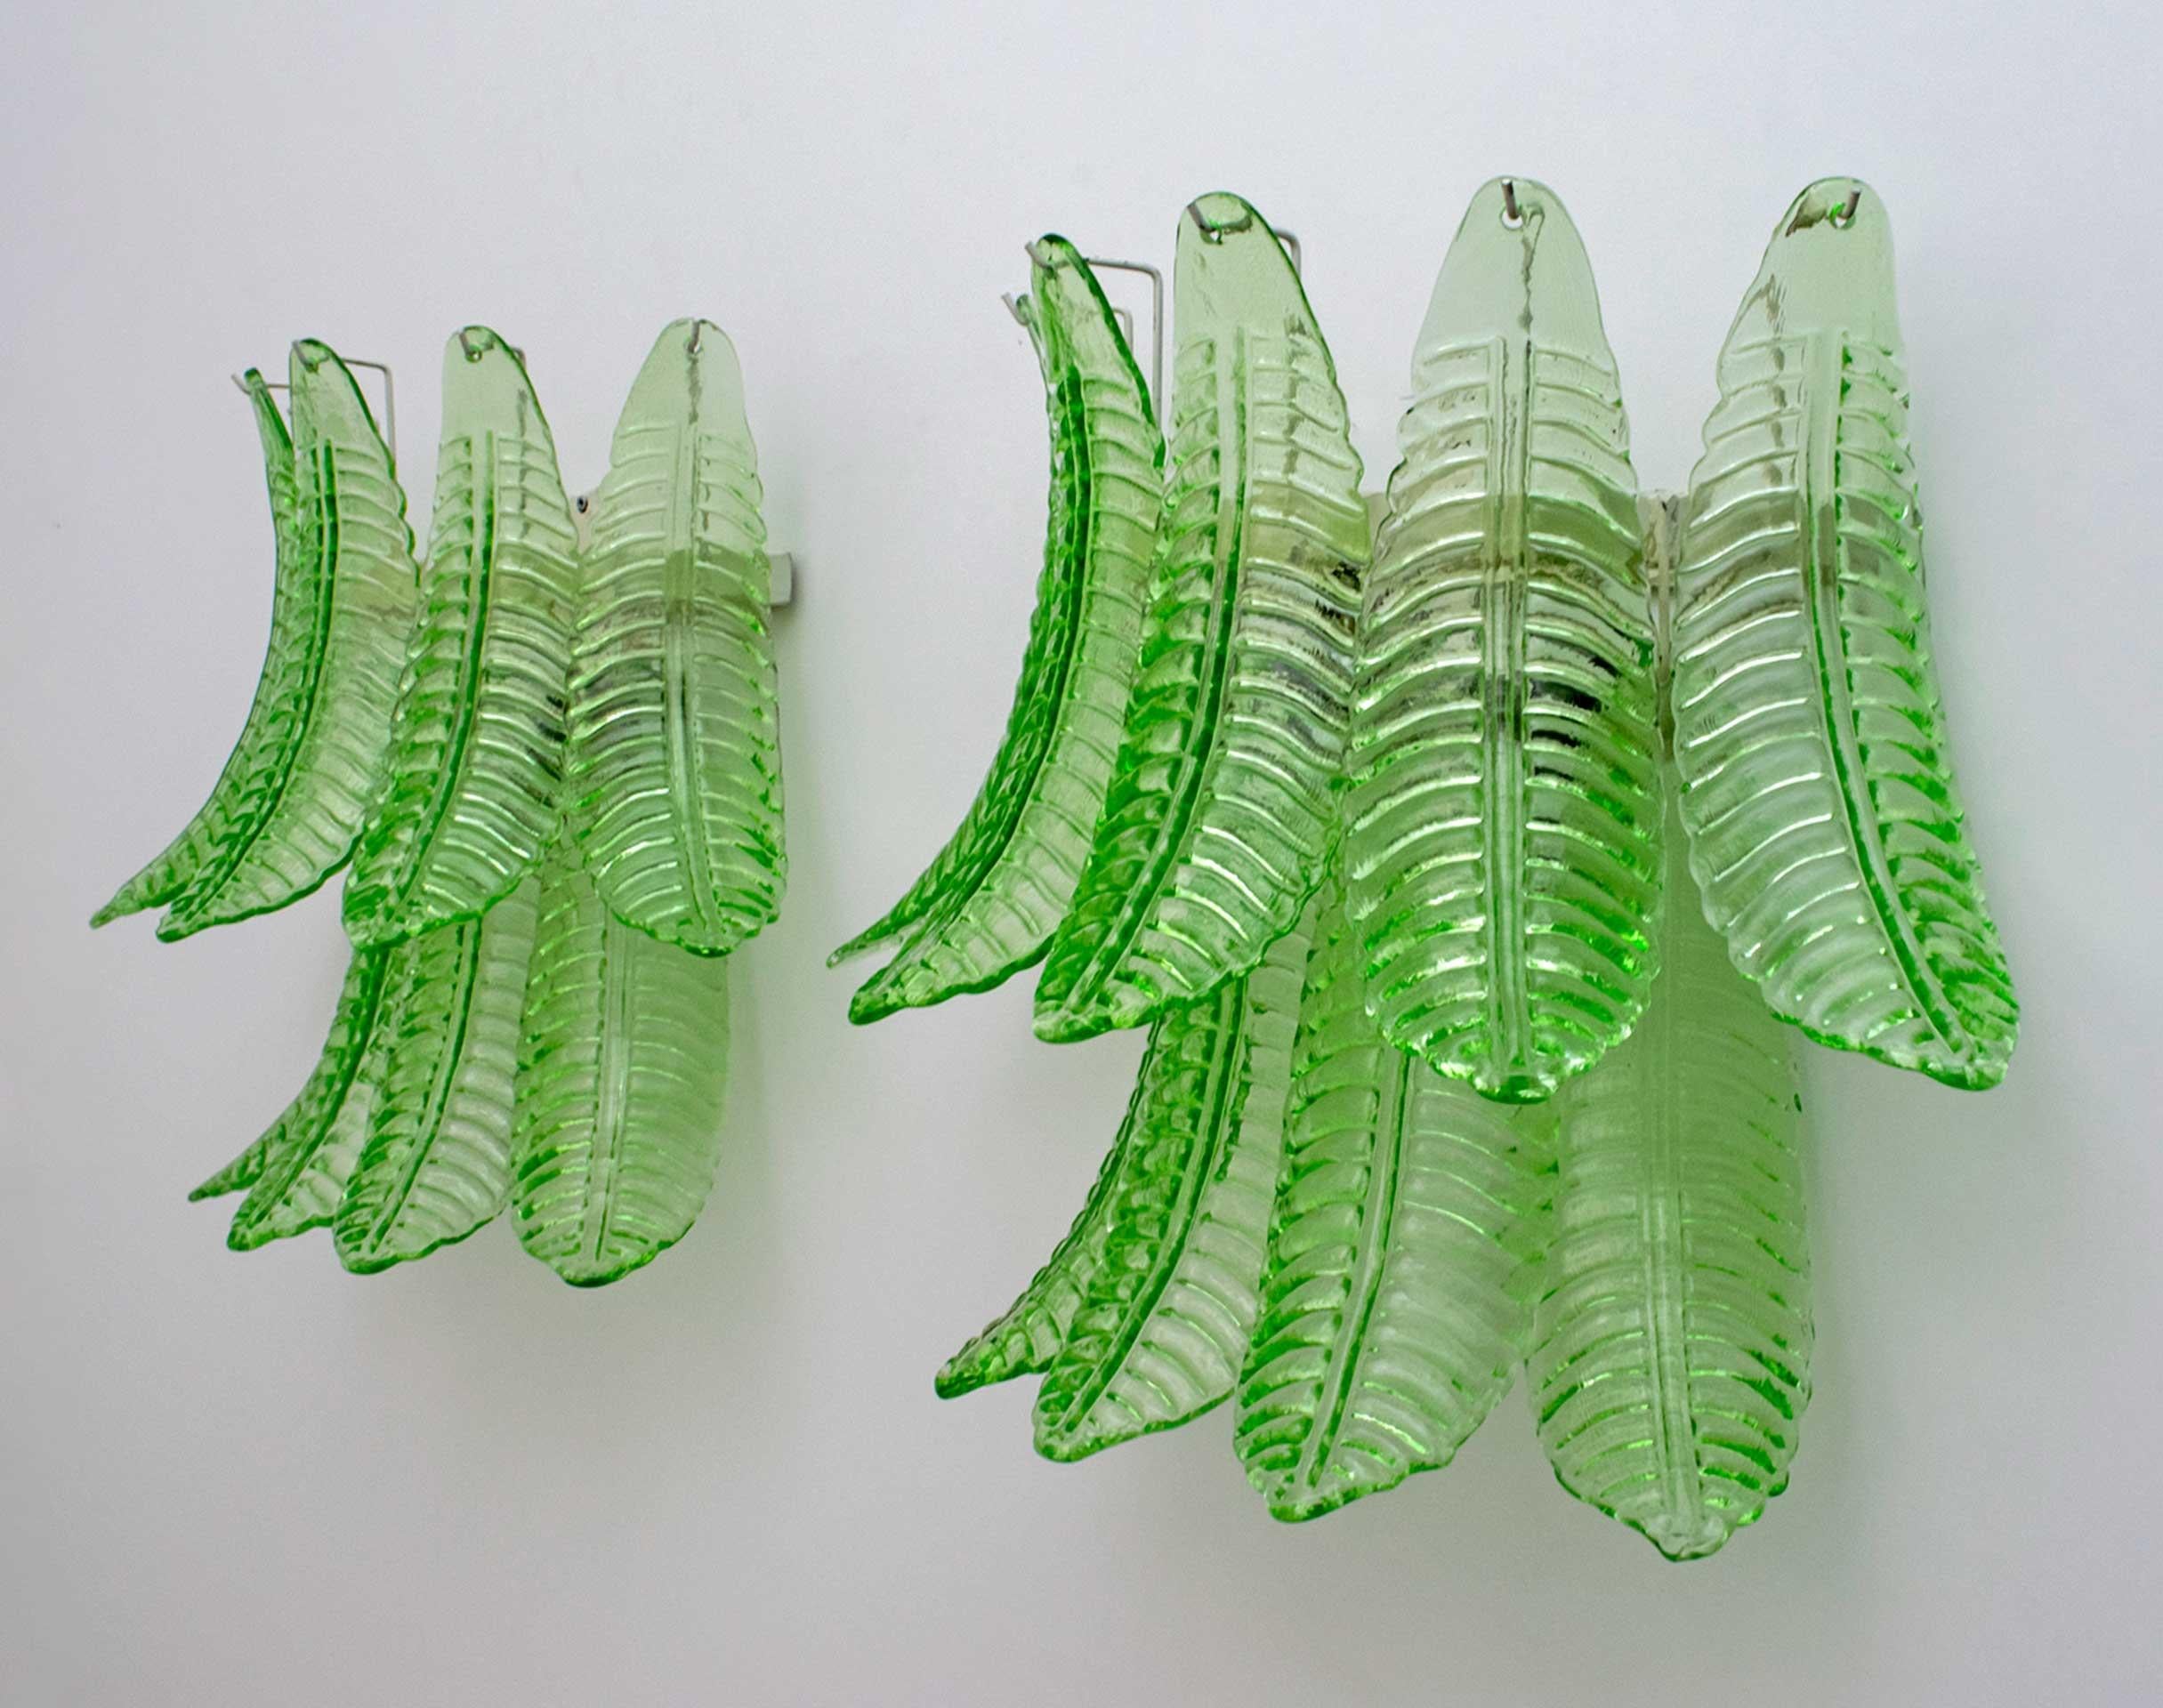 Pair of Mid-Century Modern Italian Murano Glass Palm Leaf Sconces, 1970s For Sale 4